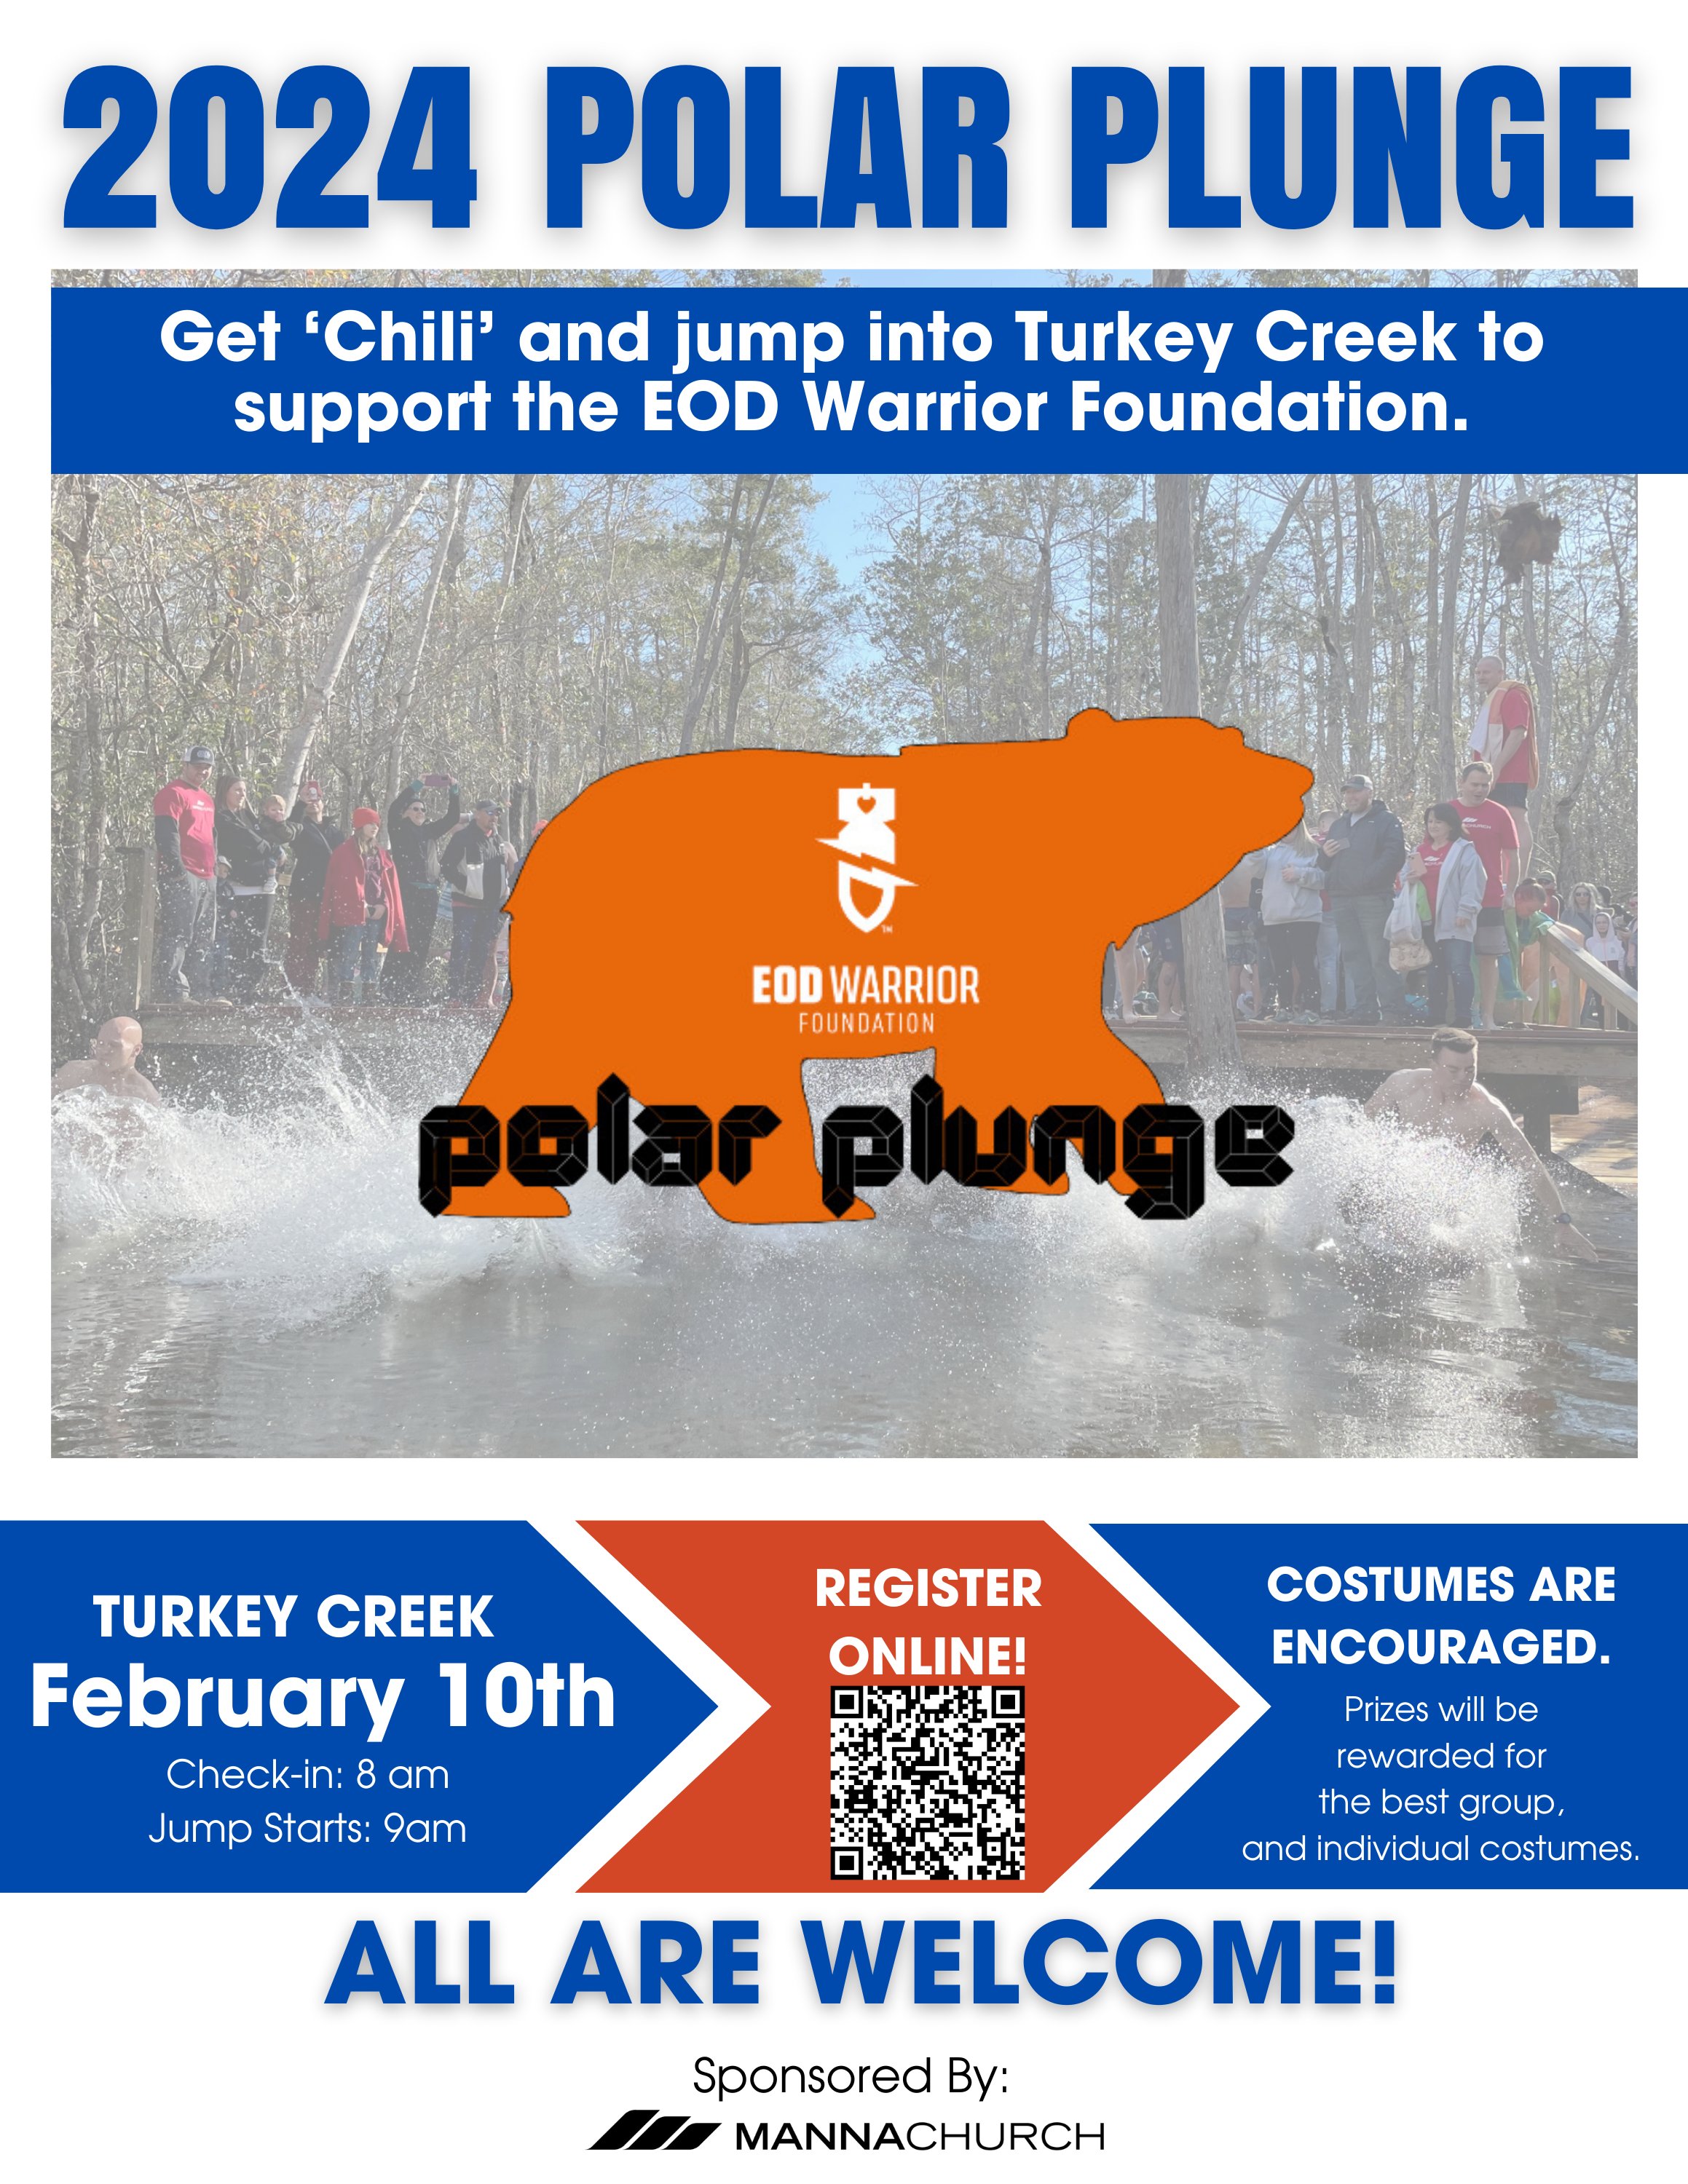 EODWarriorFoundation on X: Ready to take the plunge? Register now for the  2024 *Chili* Polar plunge! February 10 at Turkey Creek in Niceville!   Sponsored by Manna Church & supporting EOD Warrior